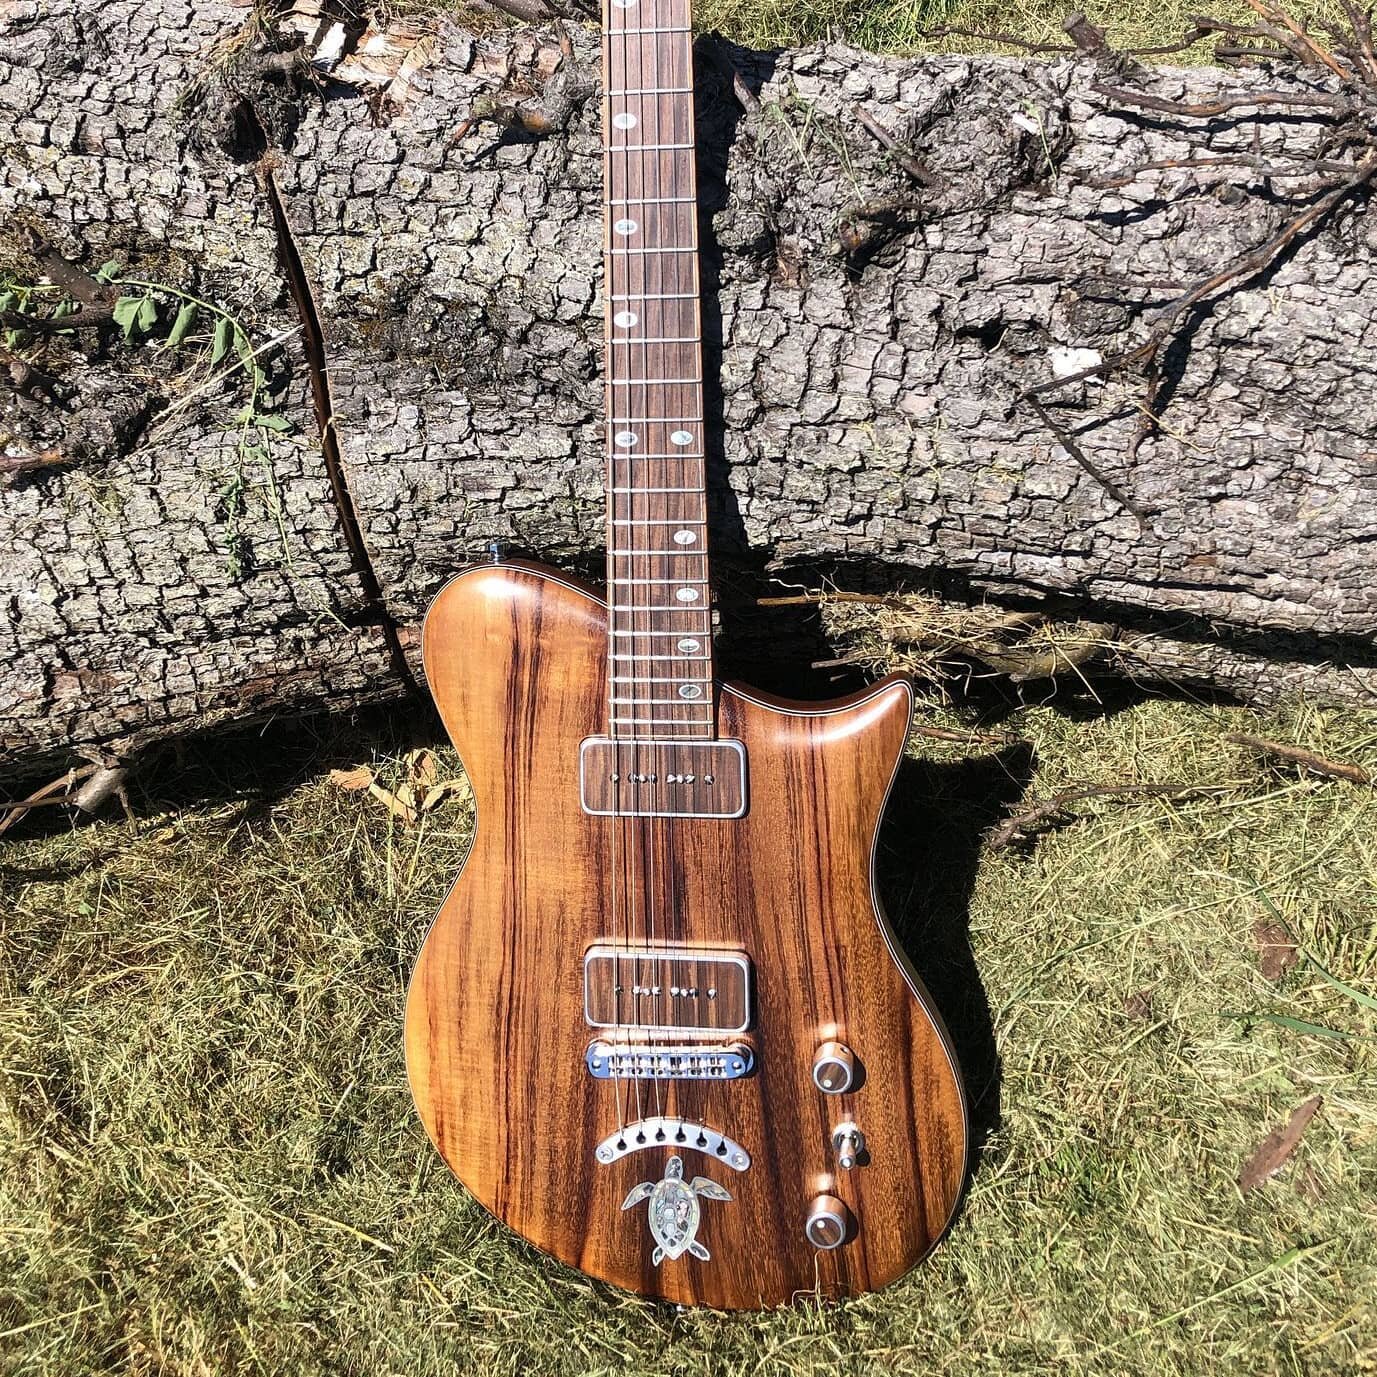 Something a bit different: our good friend Ron B has entered a guitar into the UK based 'Great Guitar Build-off 2021'. He's competing against some big social media presences so can use all the local help he can get!

https://greatguitarbuildoff.com/p